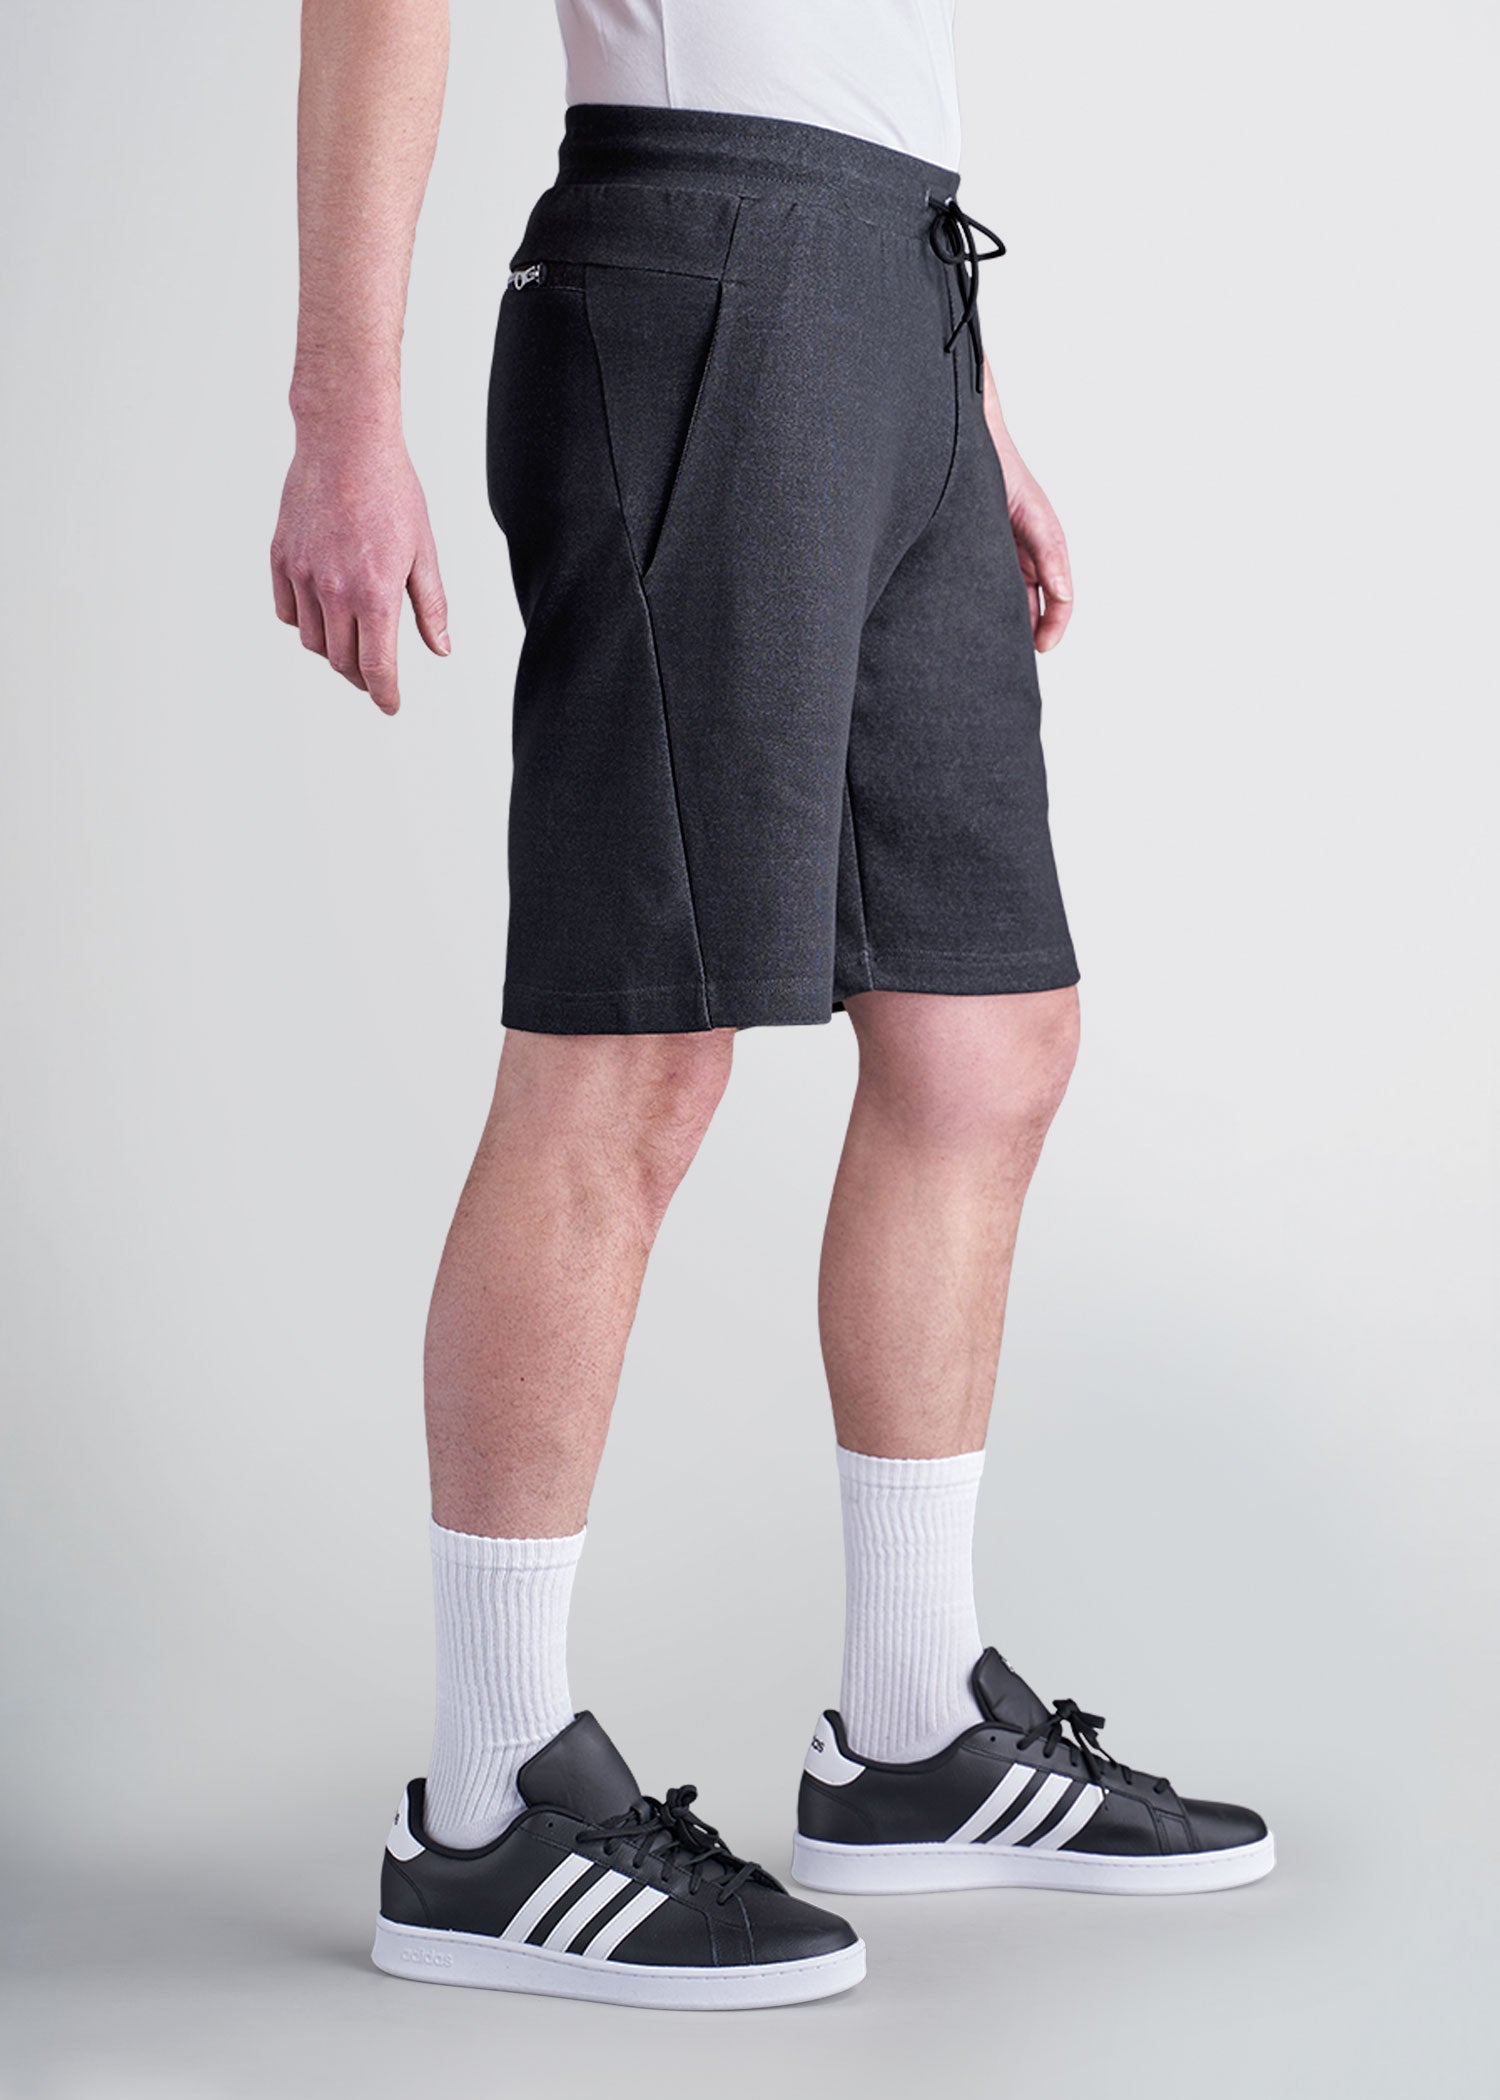 american-tall-mens-knit-athletic-shorts-charcoal-side